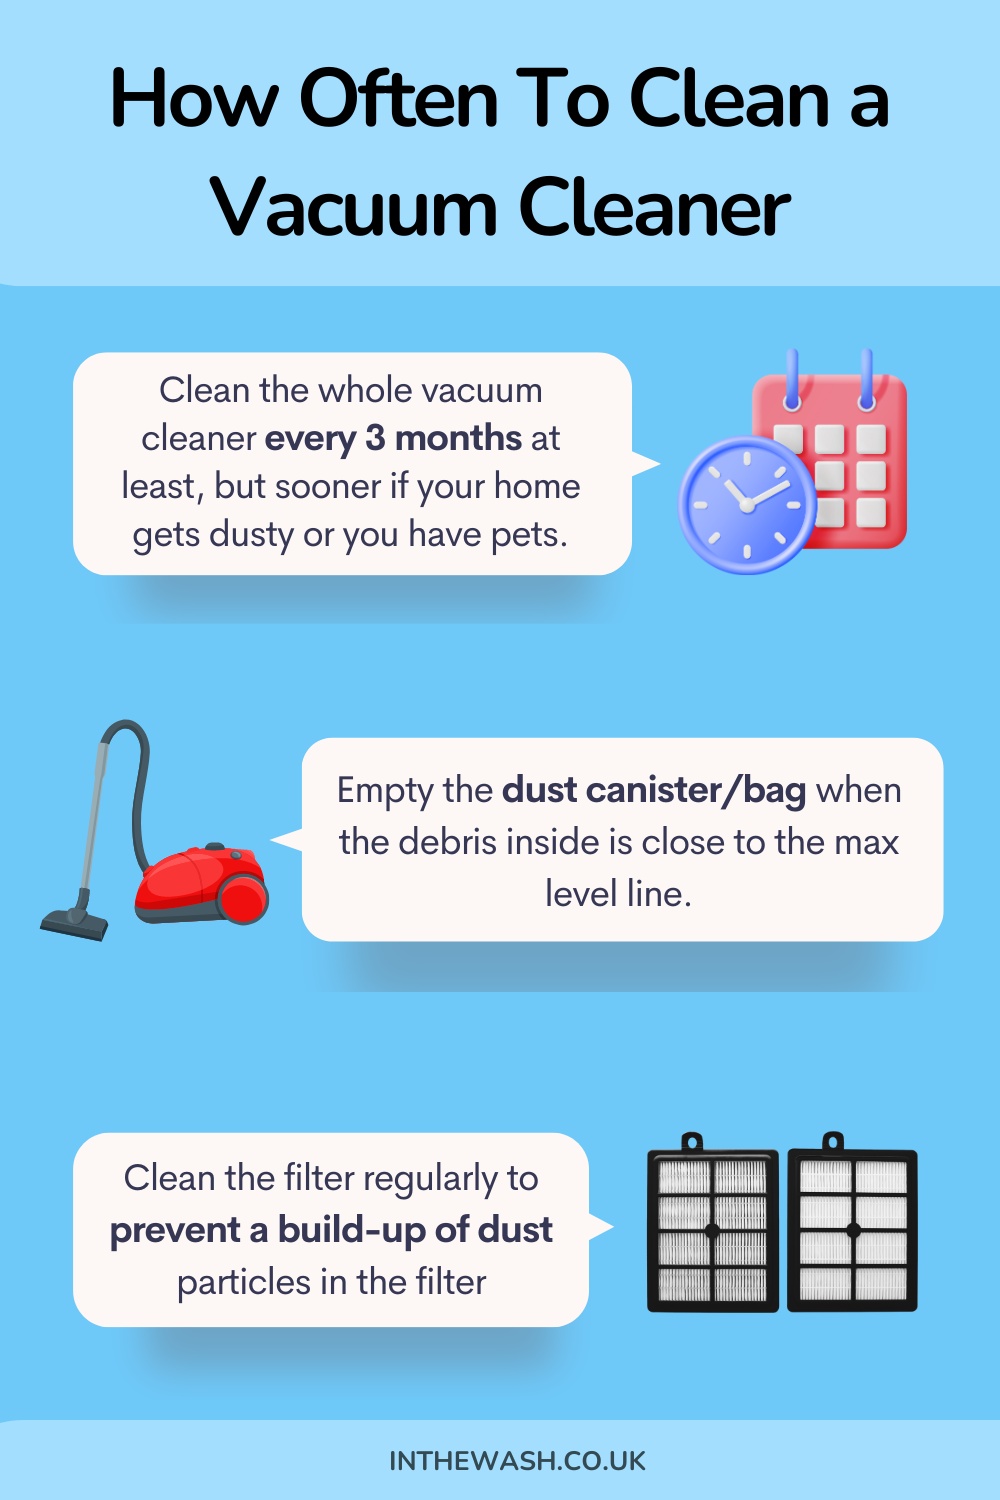 How often to clean a vacuum cleaner